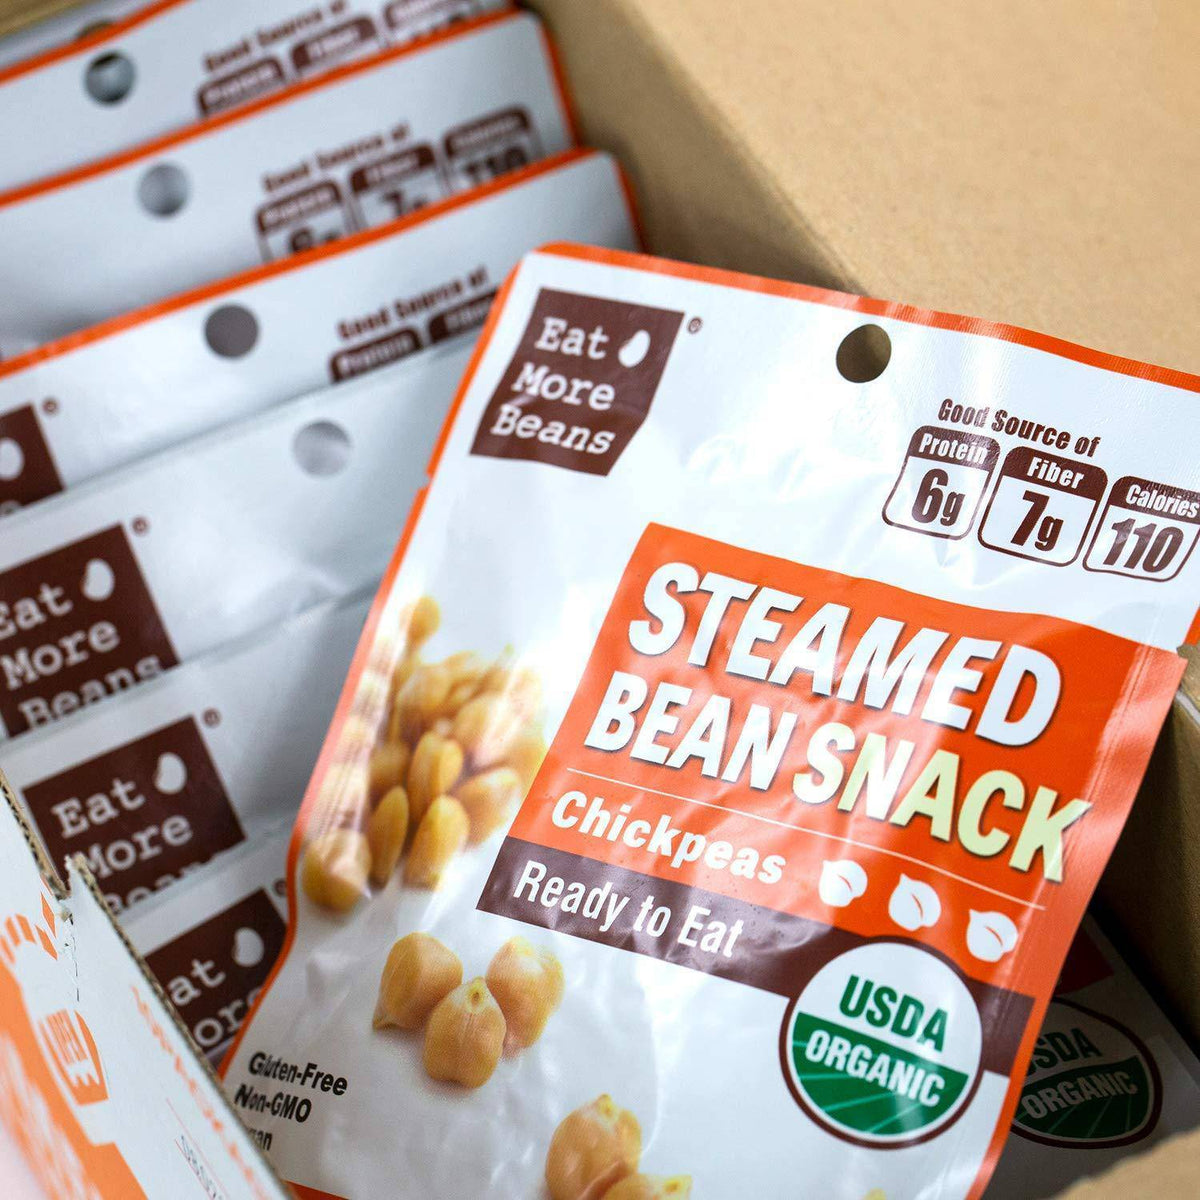 [Eat More Beans] Chickpeas STEAMED BEAN SNACK x2